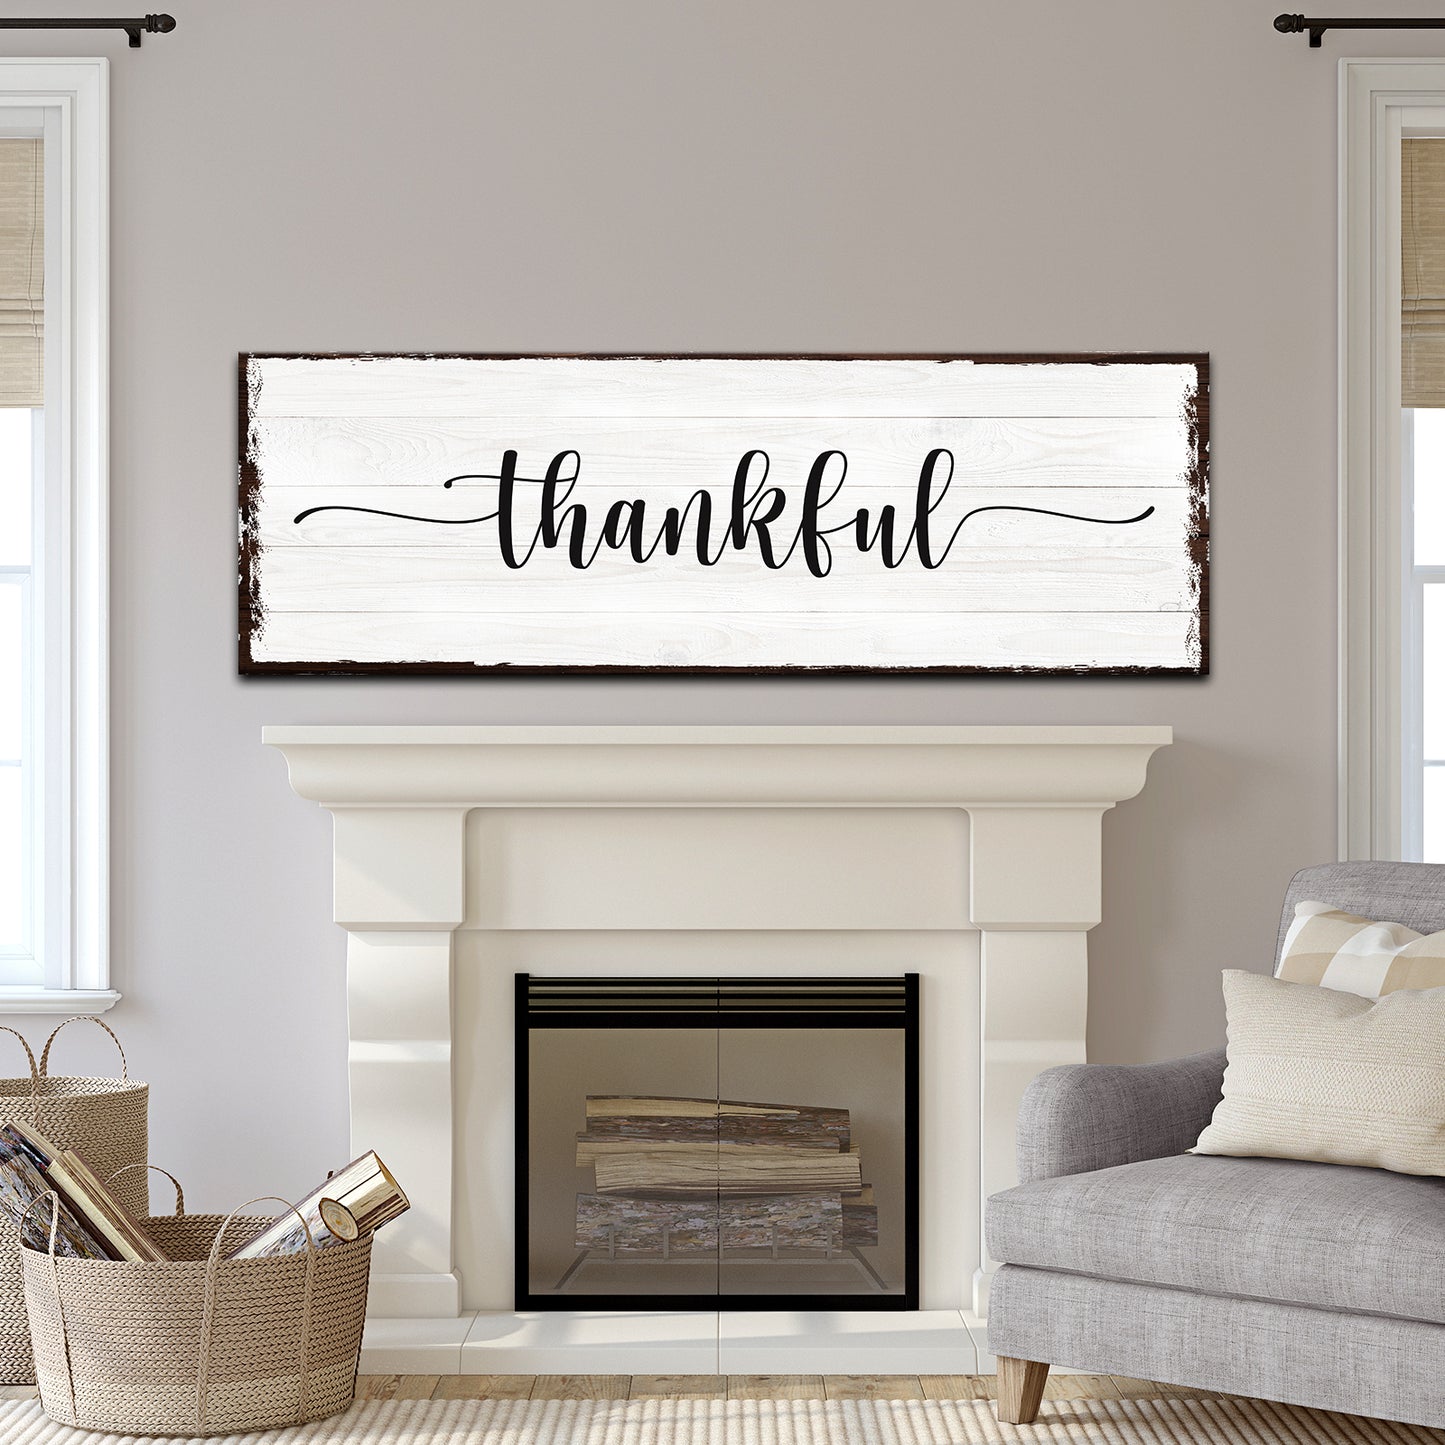 Thankful Sign - Image by Tailored Canvases